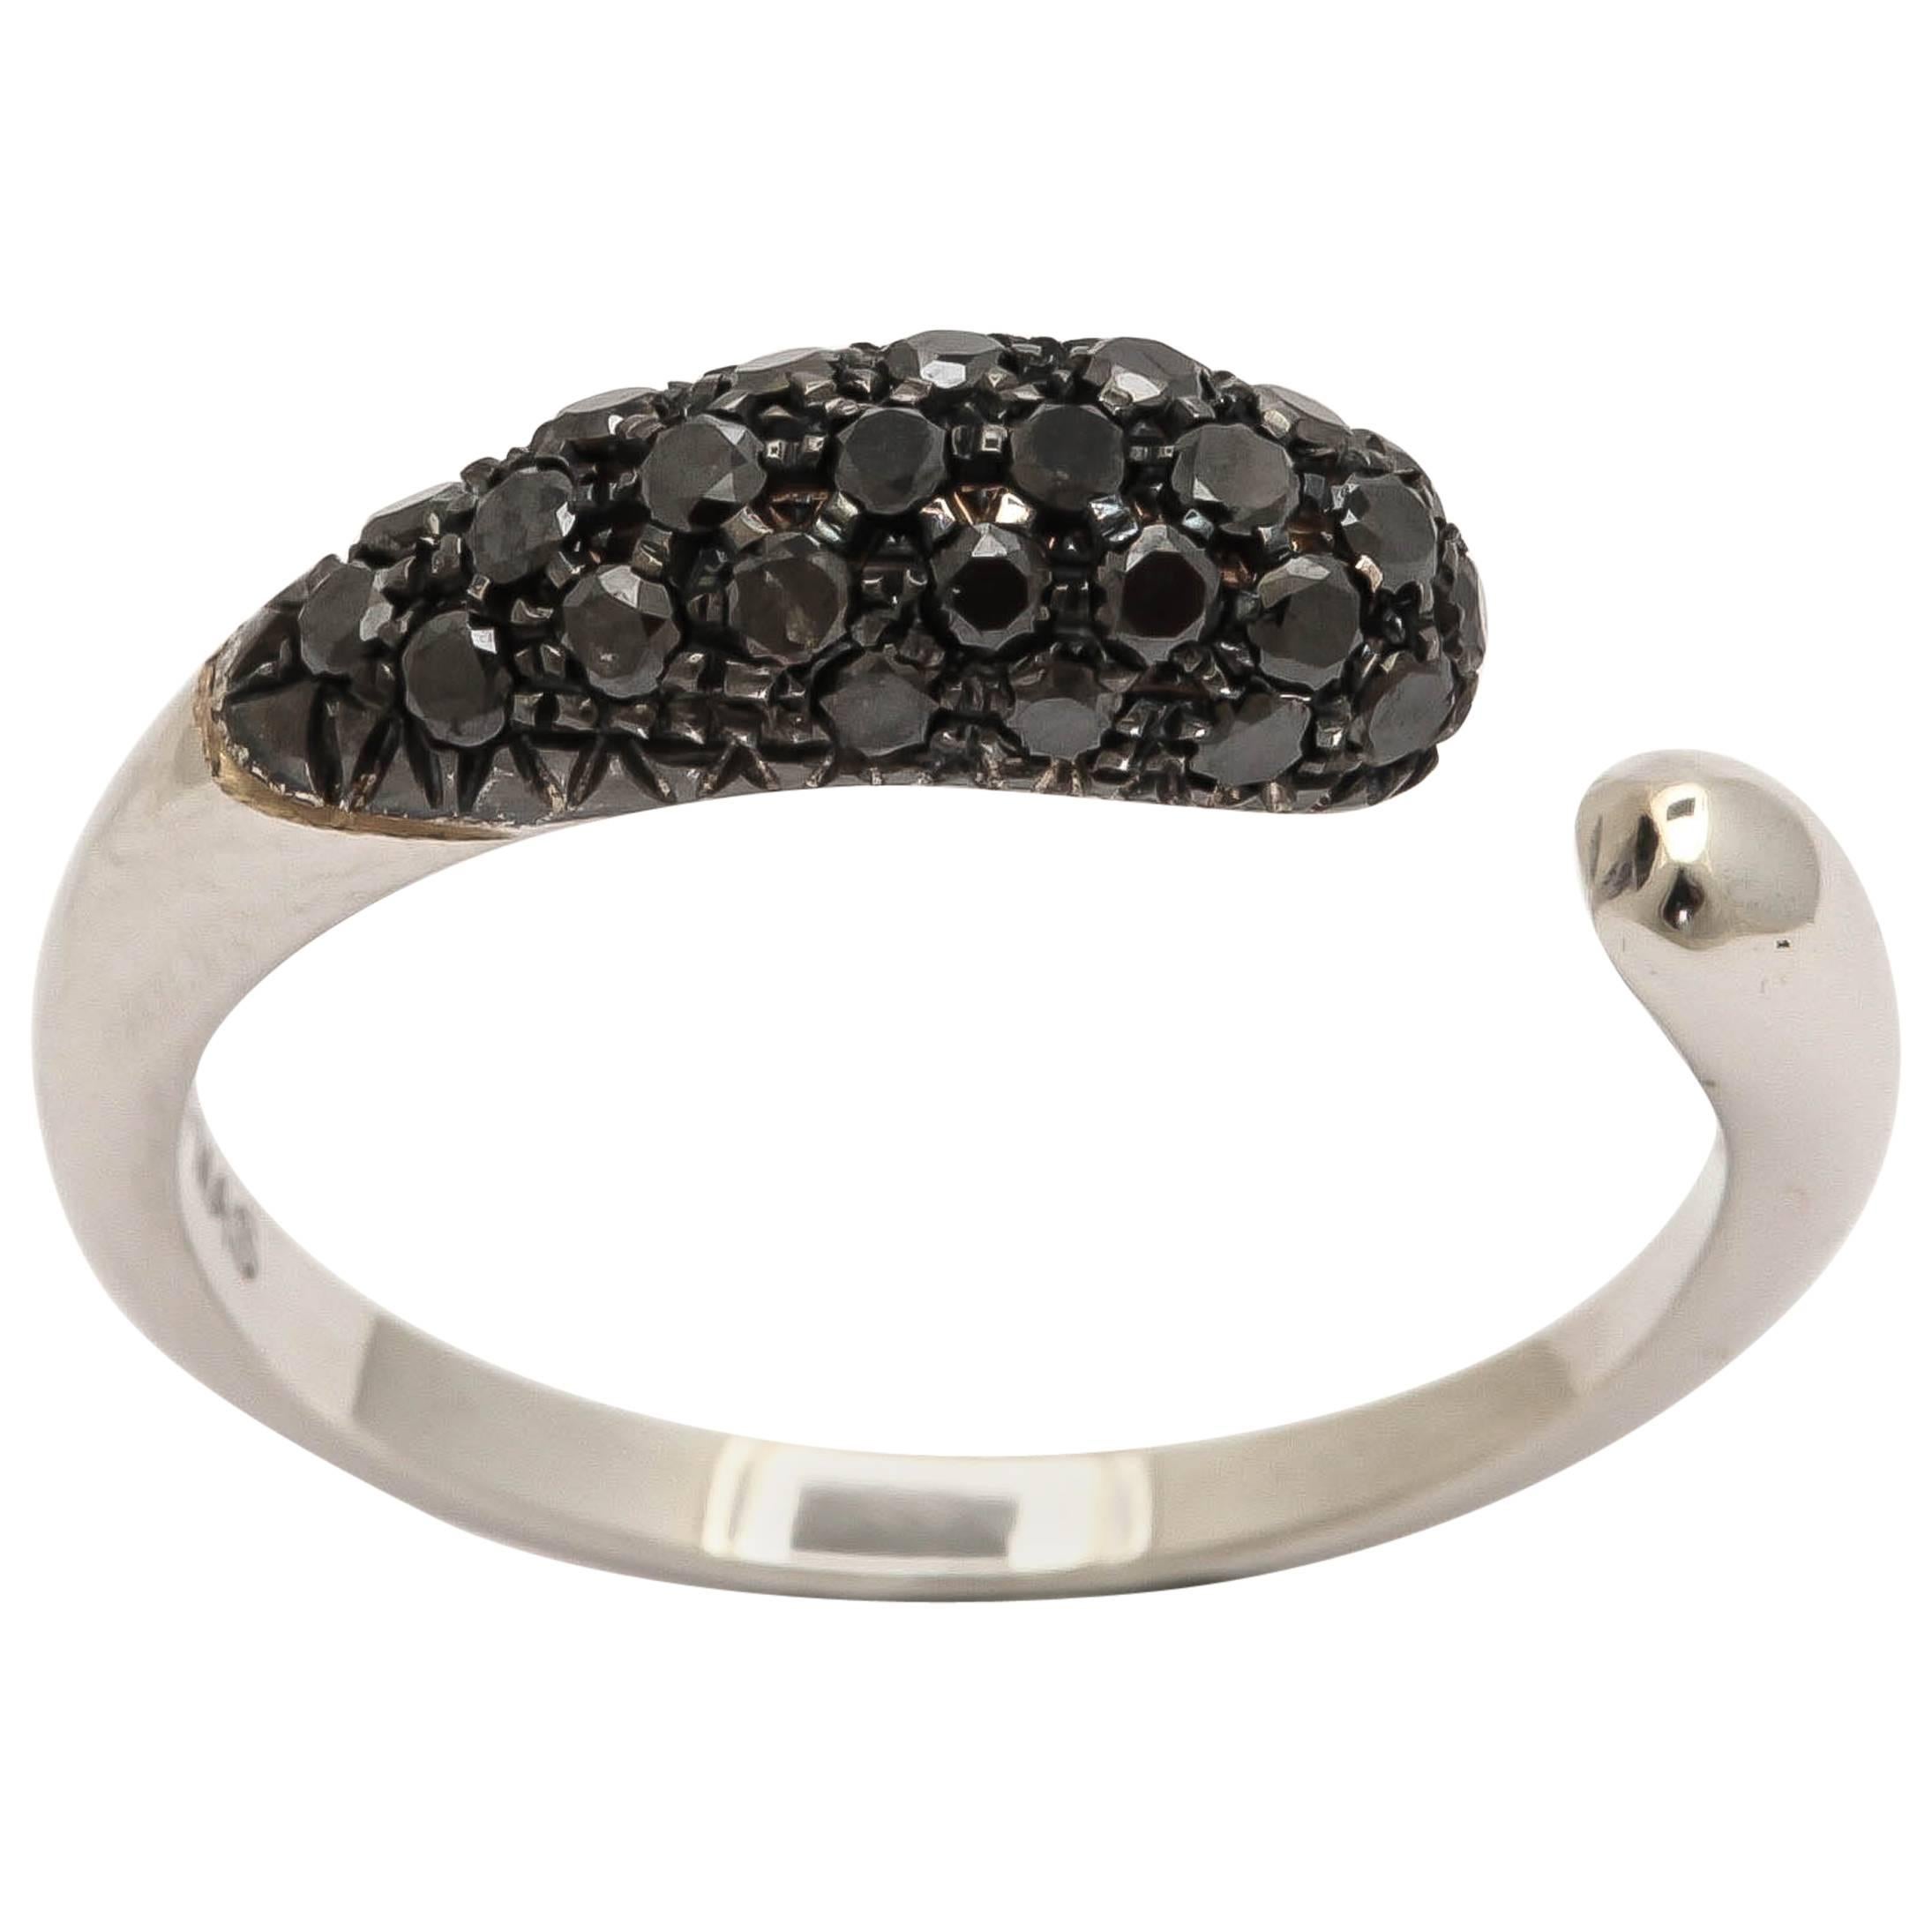 18k white gold gocce ring with black diamonds.